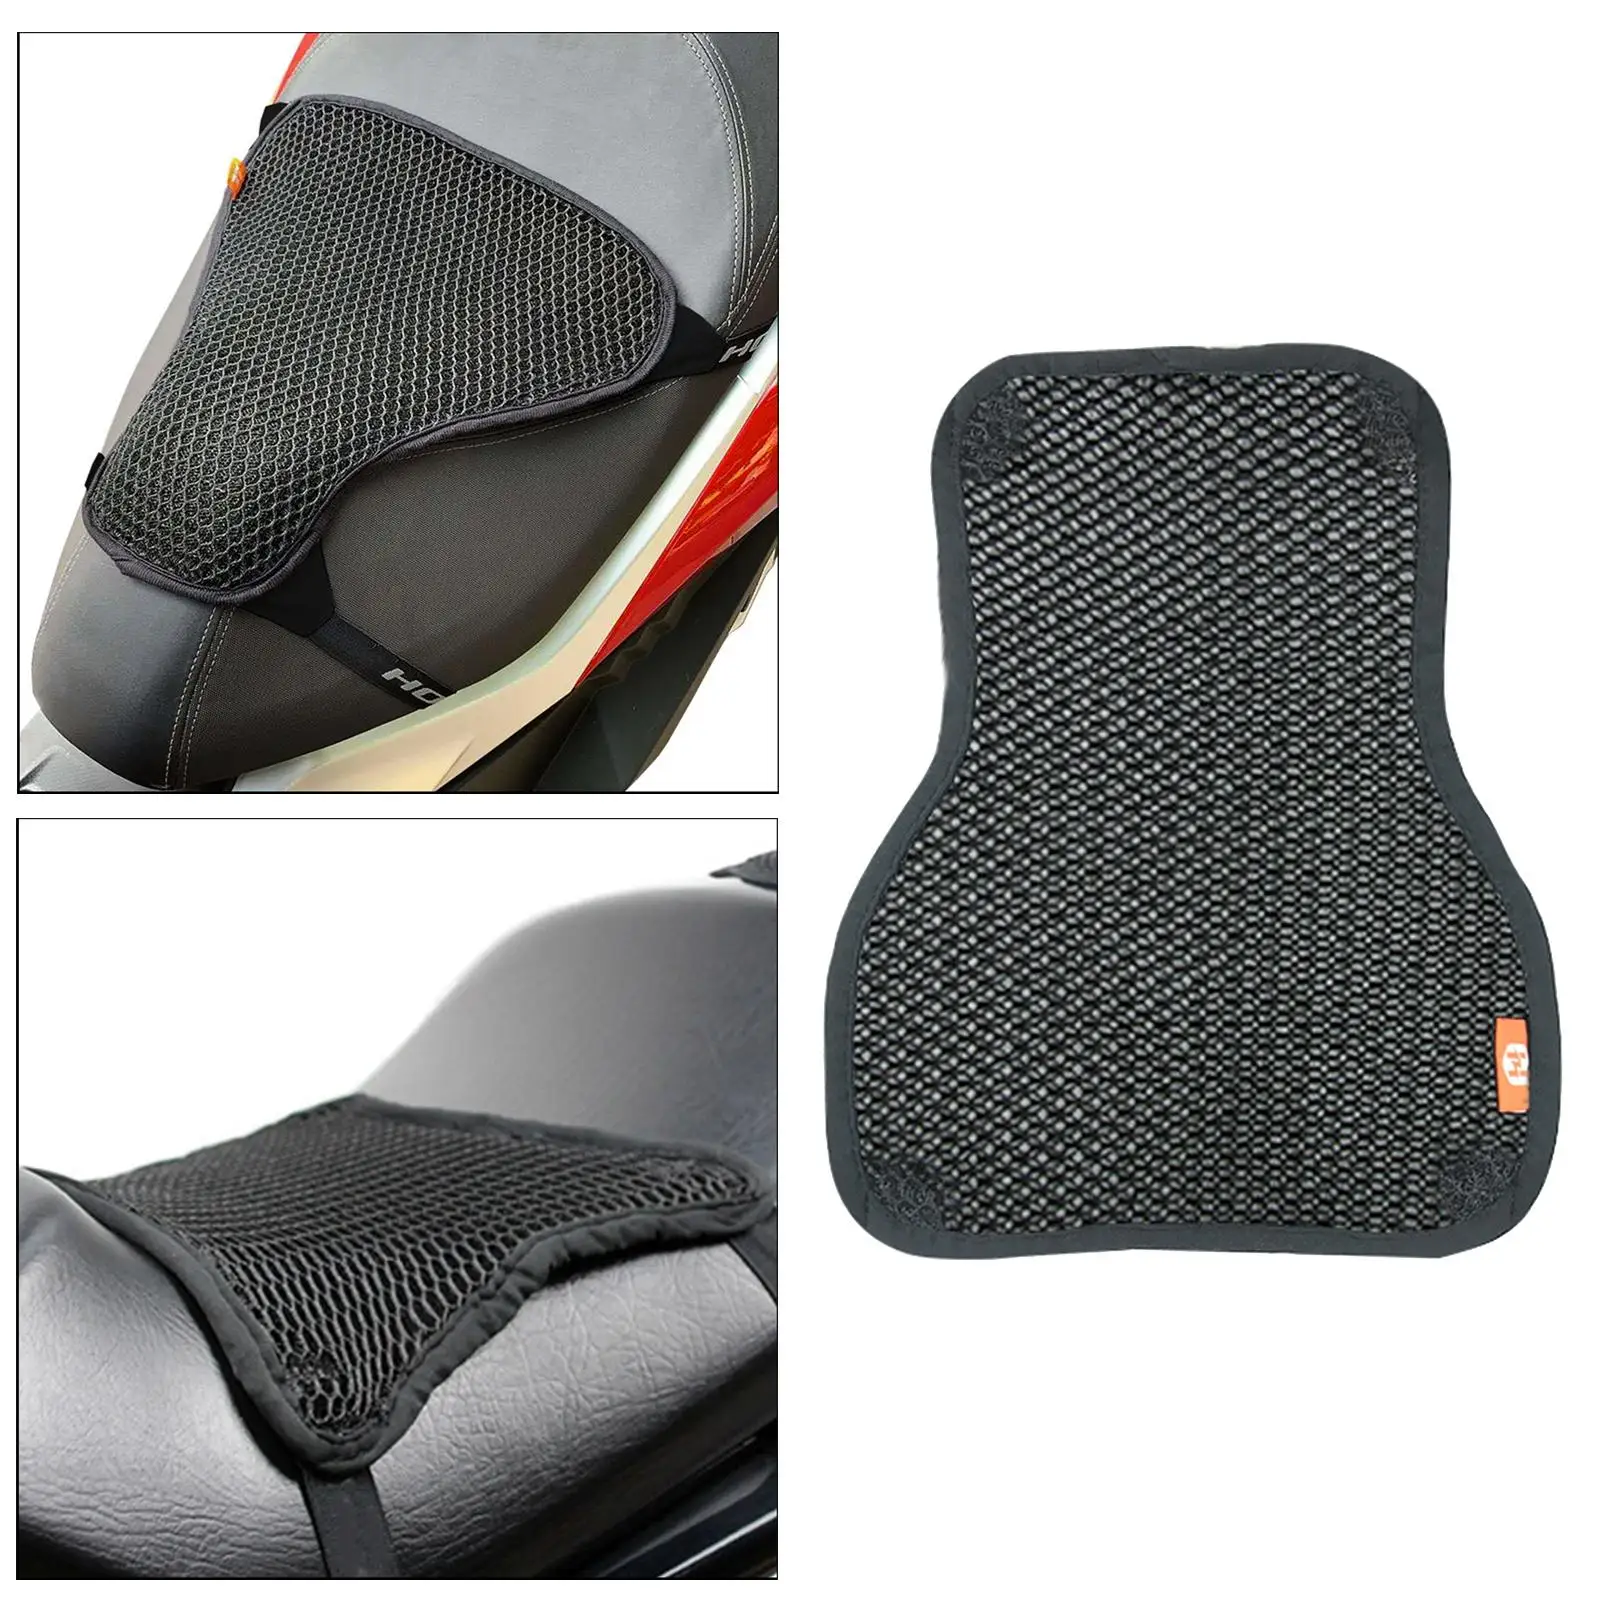 Cool Sunproof Motorcycle Seat Cushion Pad Protector Breathable Cover Makes